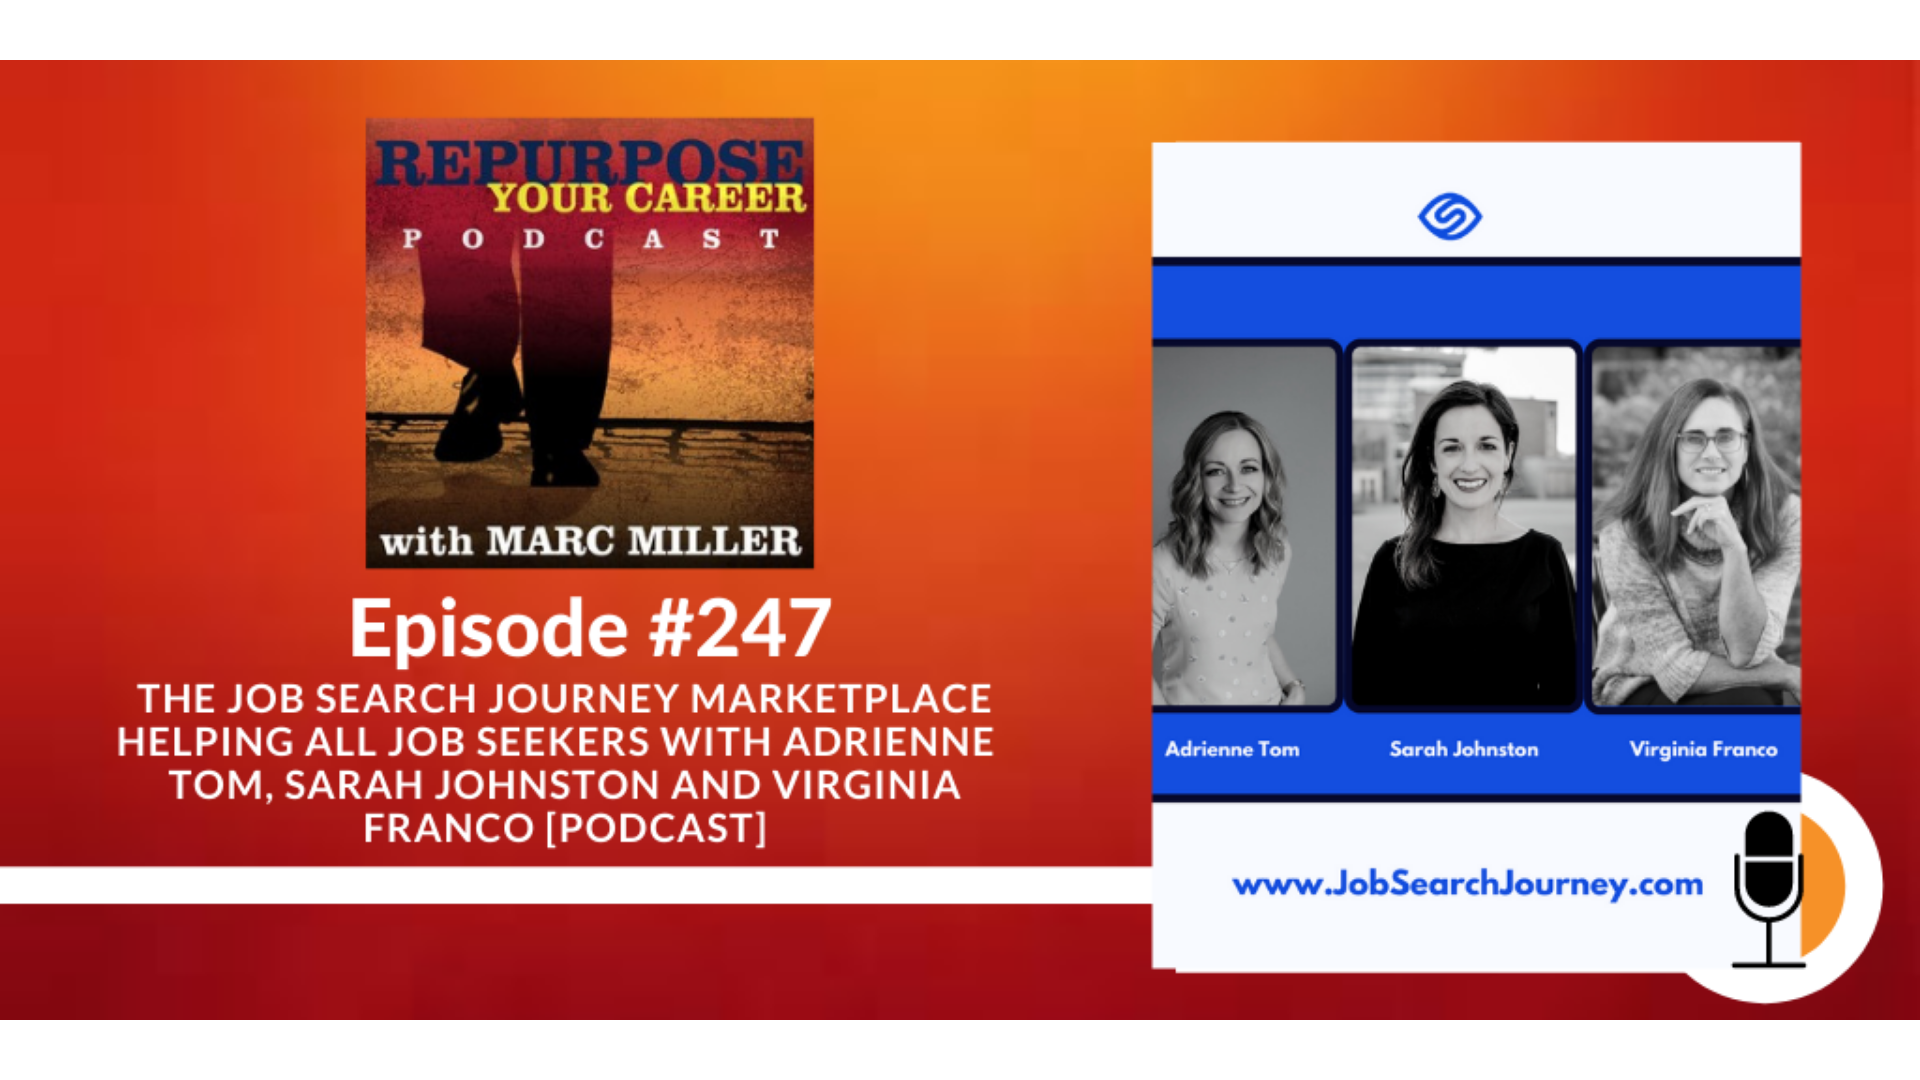 The job search market helps all job seekers [Podcast]